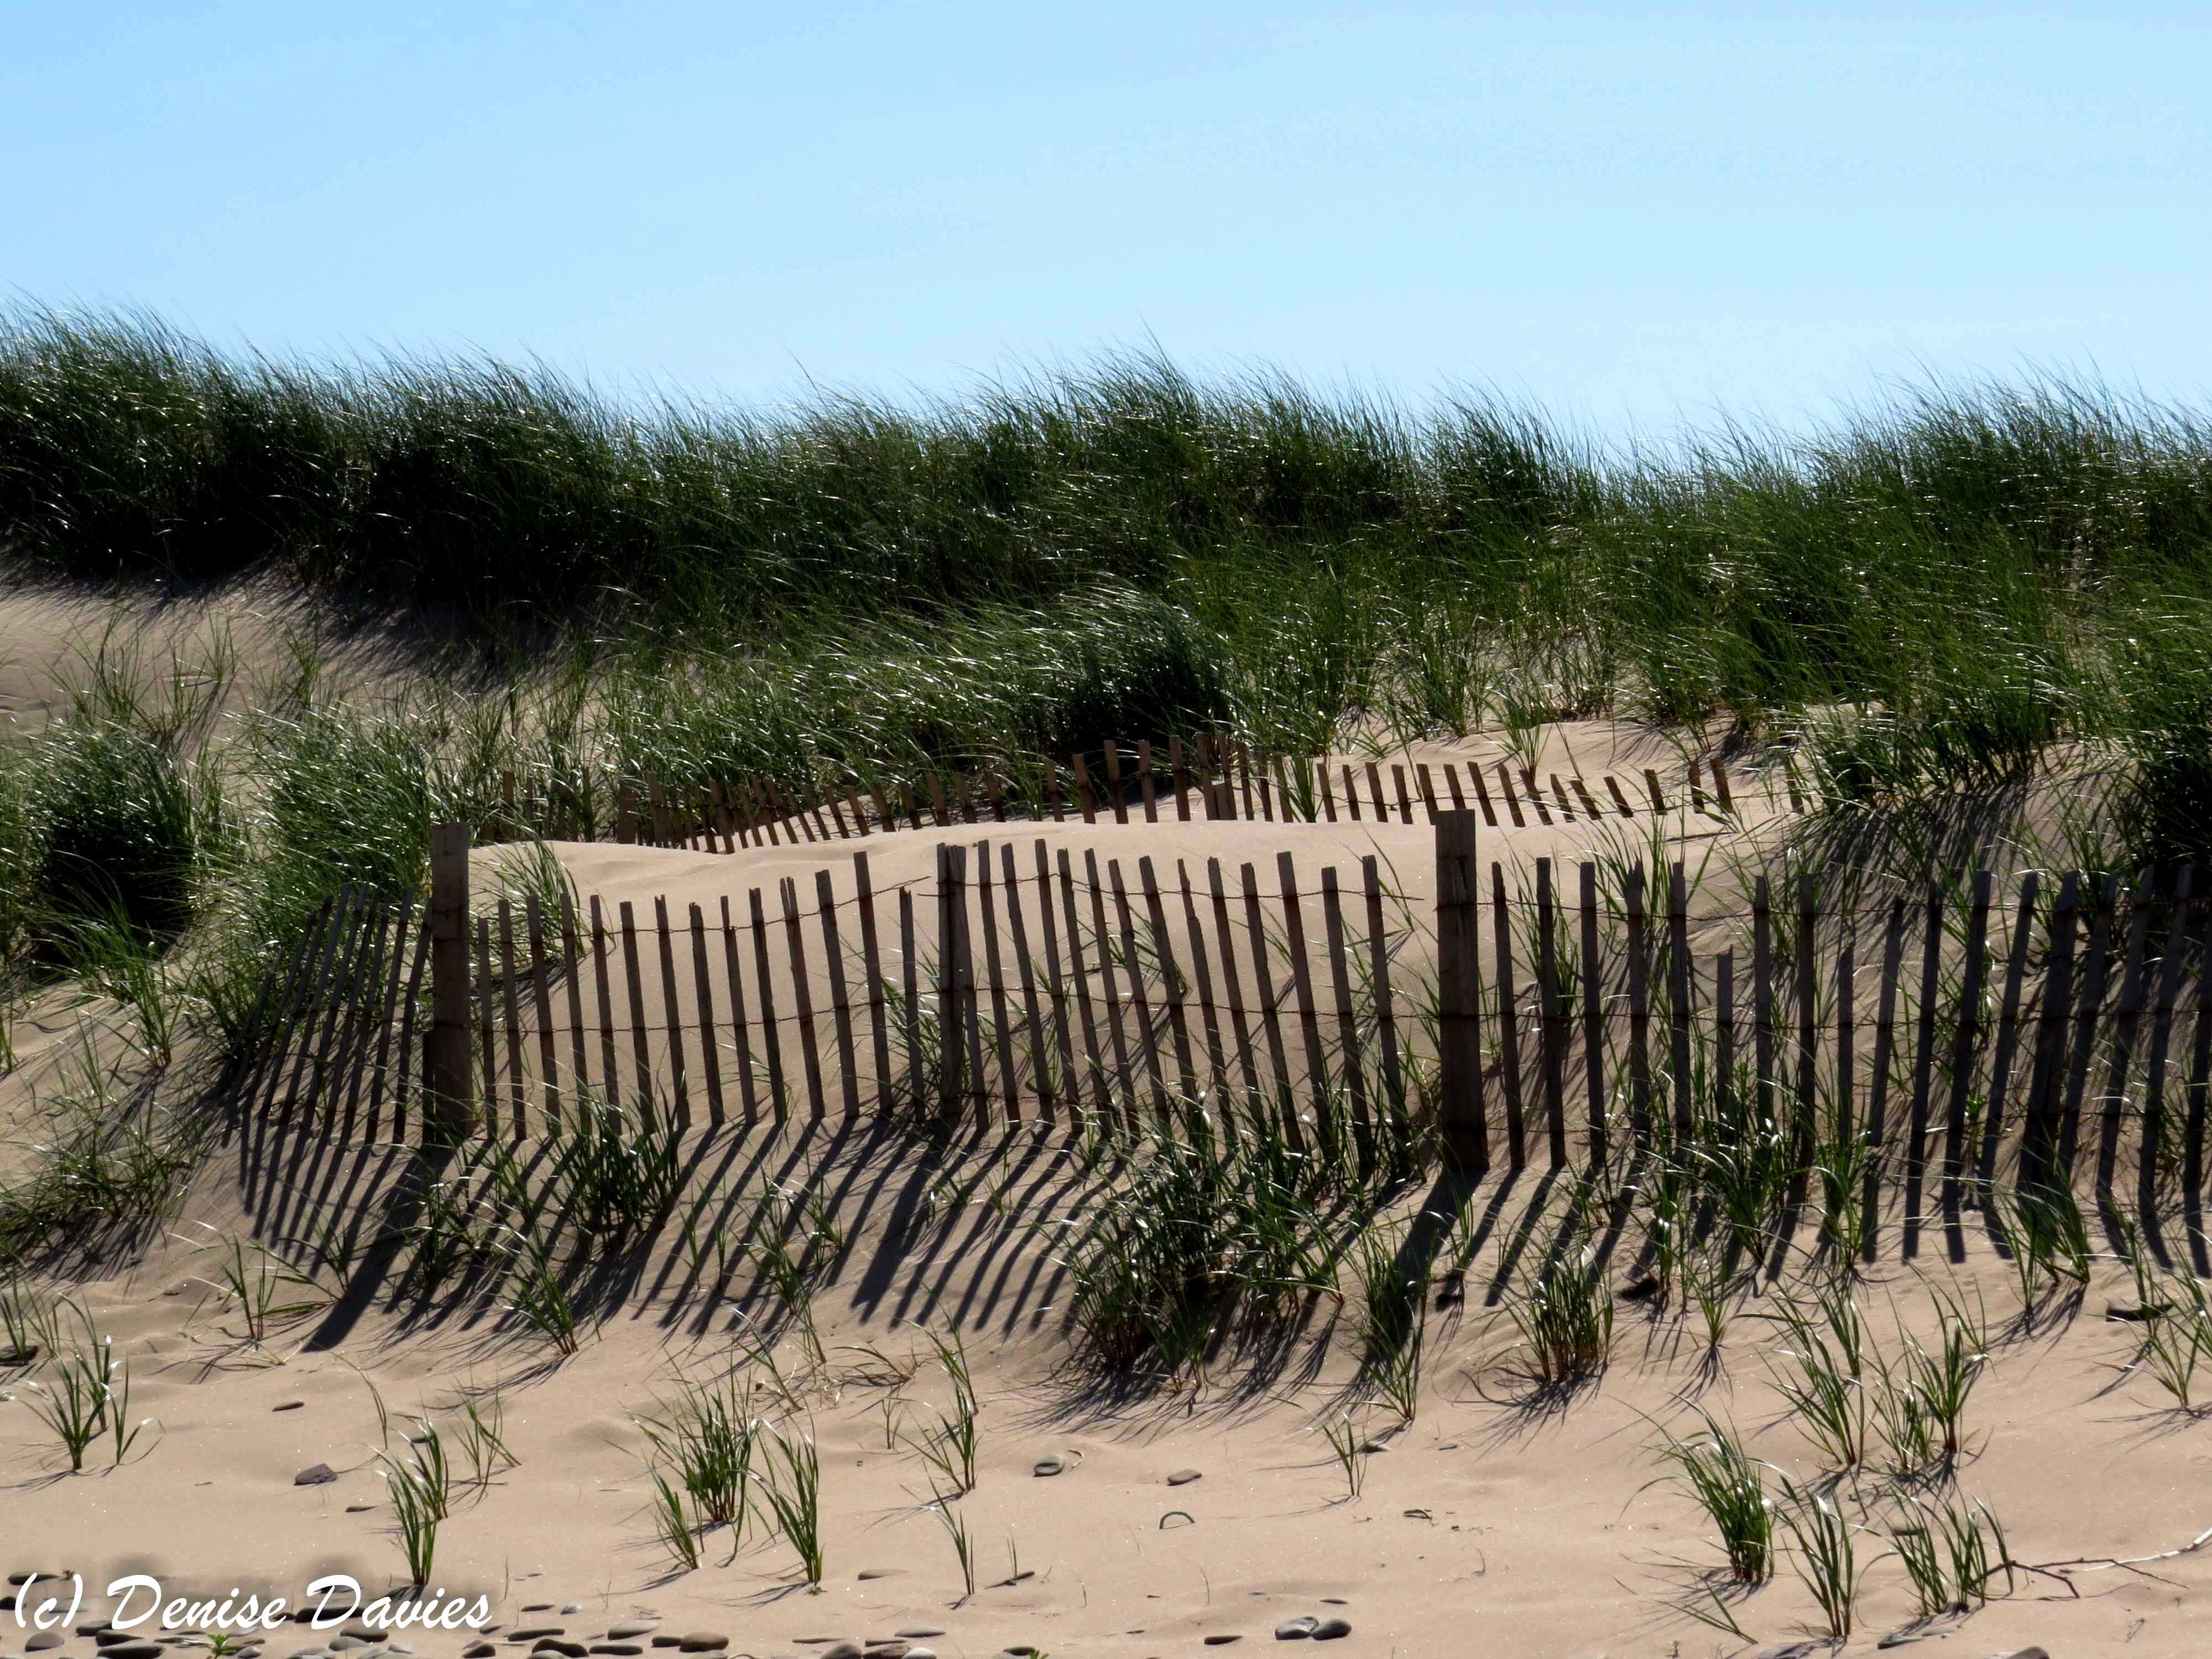 Sun and shadow on the dunes, Inverness Beach